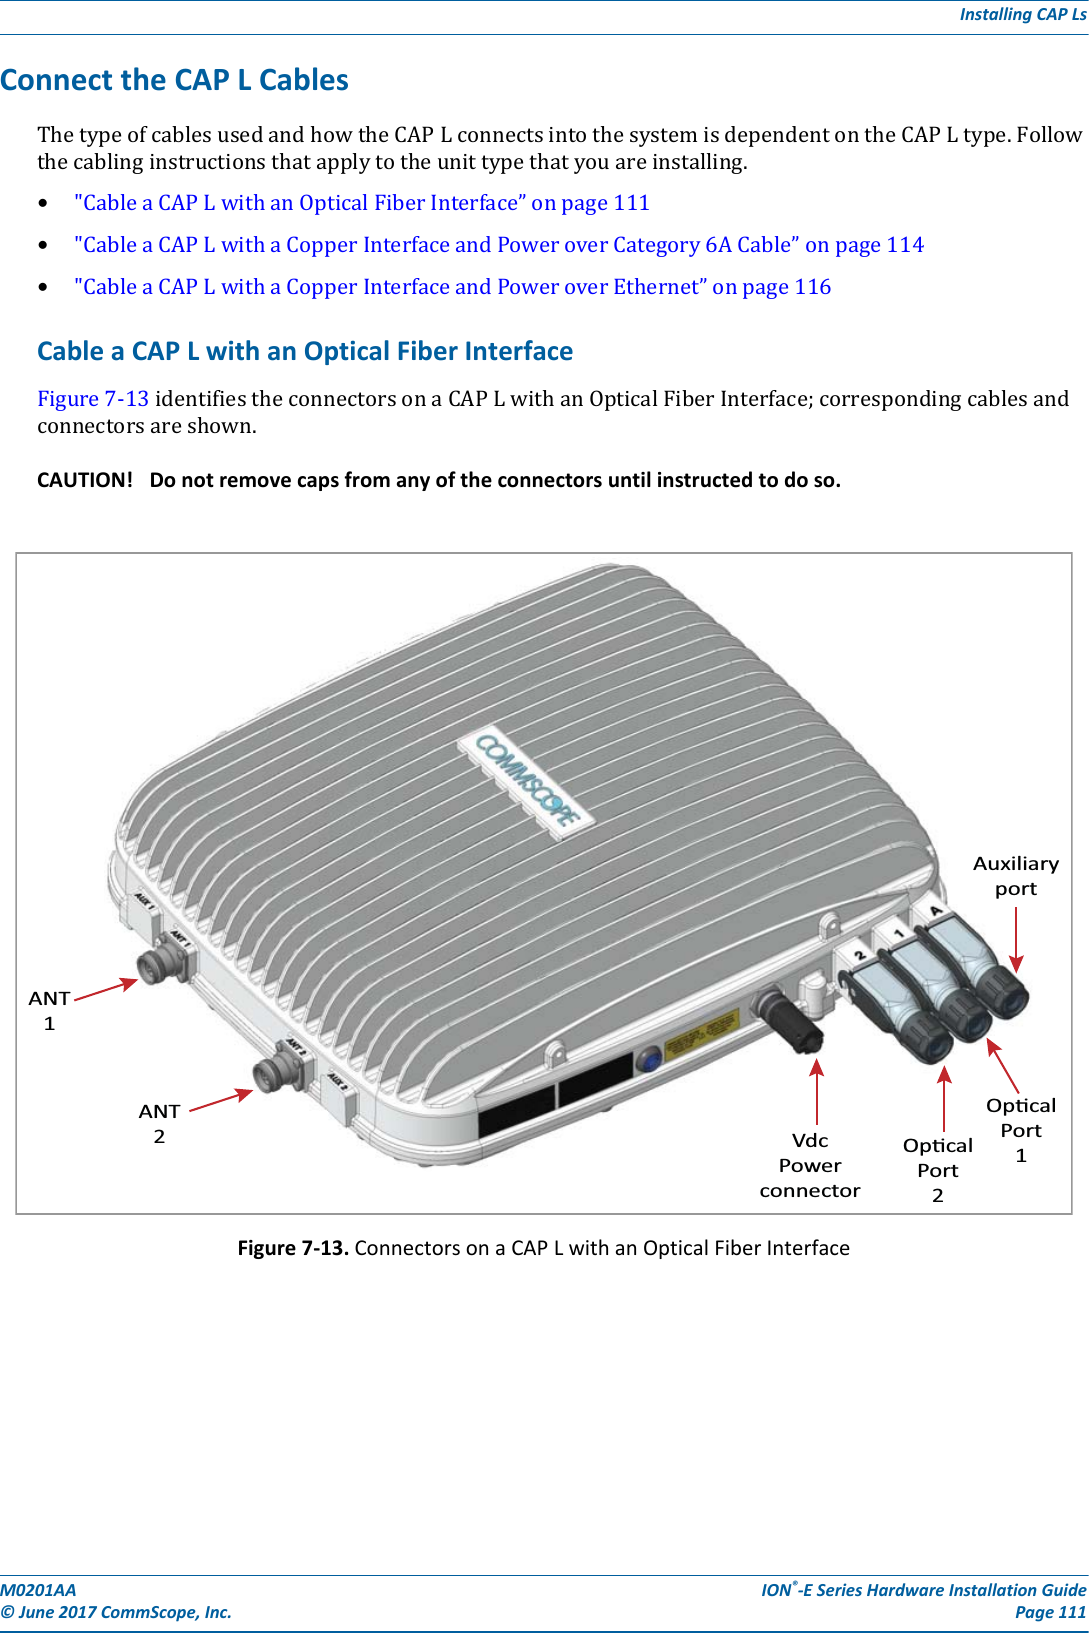 M0201AA ION®-E Series Hardware Installation Guide© June 2017 CommScope, Inc. Page 111Installing CAP LsConnect the CAP L CablesThetypeofcablesusedandhowtheCAPLconnectsintothesystemisdependentontheCAPLtype.Followthecablinginstructionsthatapplytotheunittypethatyouareinstalling.•&quot;CableaCAPLwithanOpticalFiberInterface”onpage111•&quot;CableaCAPLwithaCopperInterfaceandPoweroverCategory6ACable”onpage114•&quot;CableaCAPLwithaCopperInterfaceandPoweroverEthernet”onpage116Cable a CAP L with an Optical Fiber InterfaceFigure7-13identifiestheconnectorsonaCAPLwithanOpticalFiberInterface;correspondingcablesandconnectorsareshown.CAUTION! Do not remove caps from any of the connectors until instructed to do so.Figure 7-13. Connectors on a CAP L with an Optical Fiber InterfaceANT1ANT2VdcPowerconnectorOpcalPort2OpcalPort1Auxiliaryport